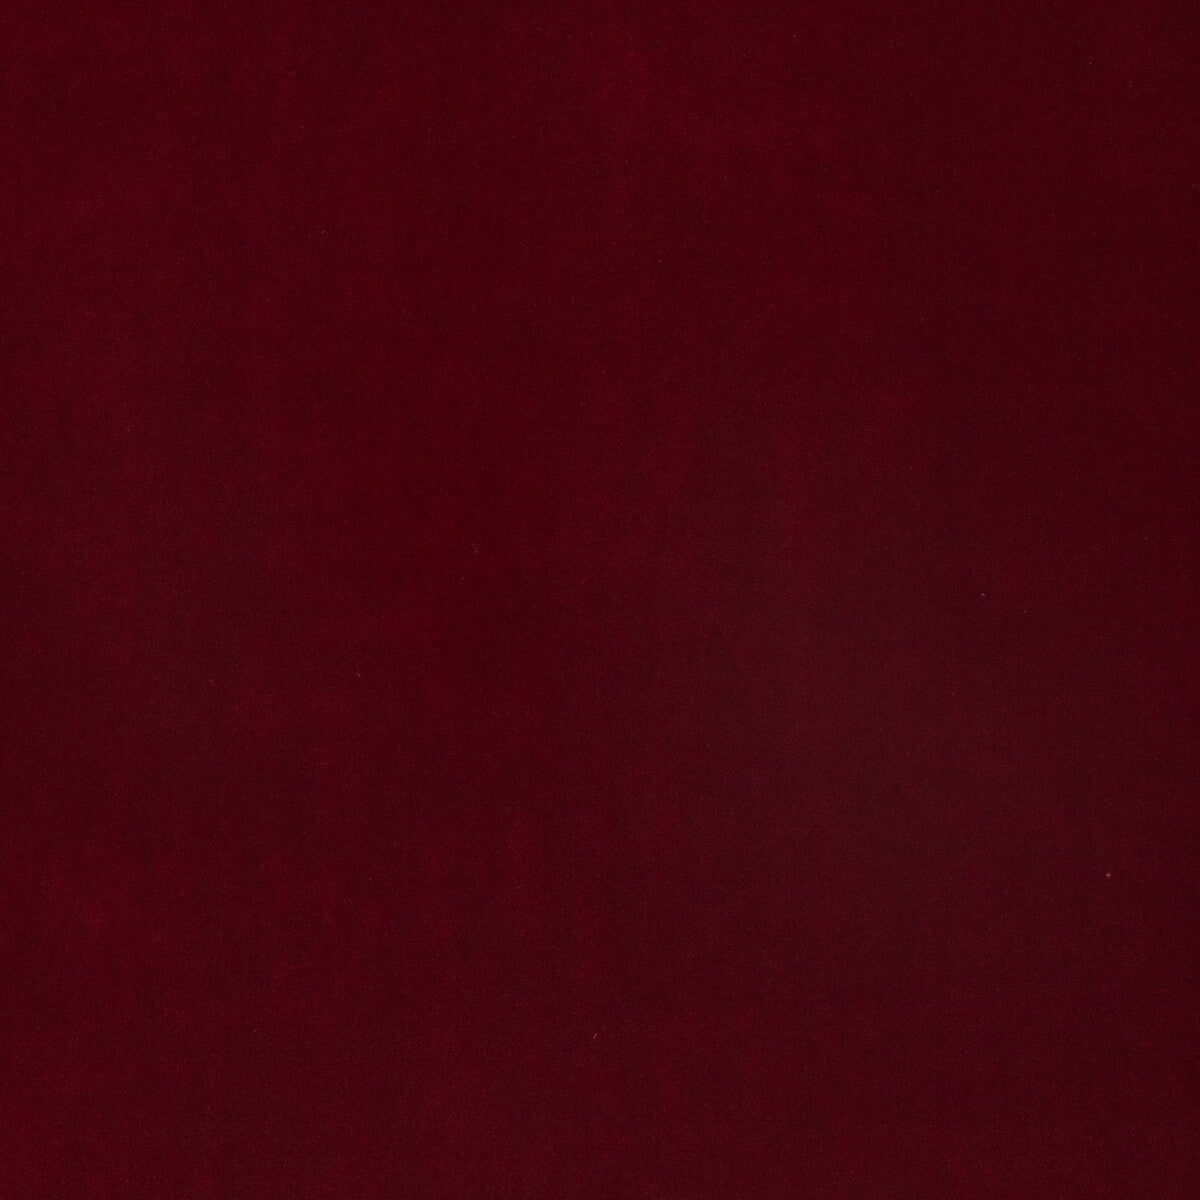 Lyla Velvet fabric in ruby color - pattern 35825.480.0 - by Kravet Contract in the Riviera Velvet collection